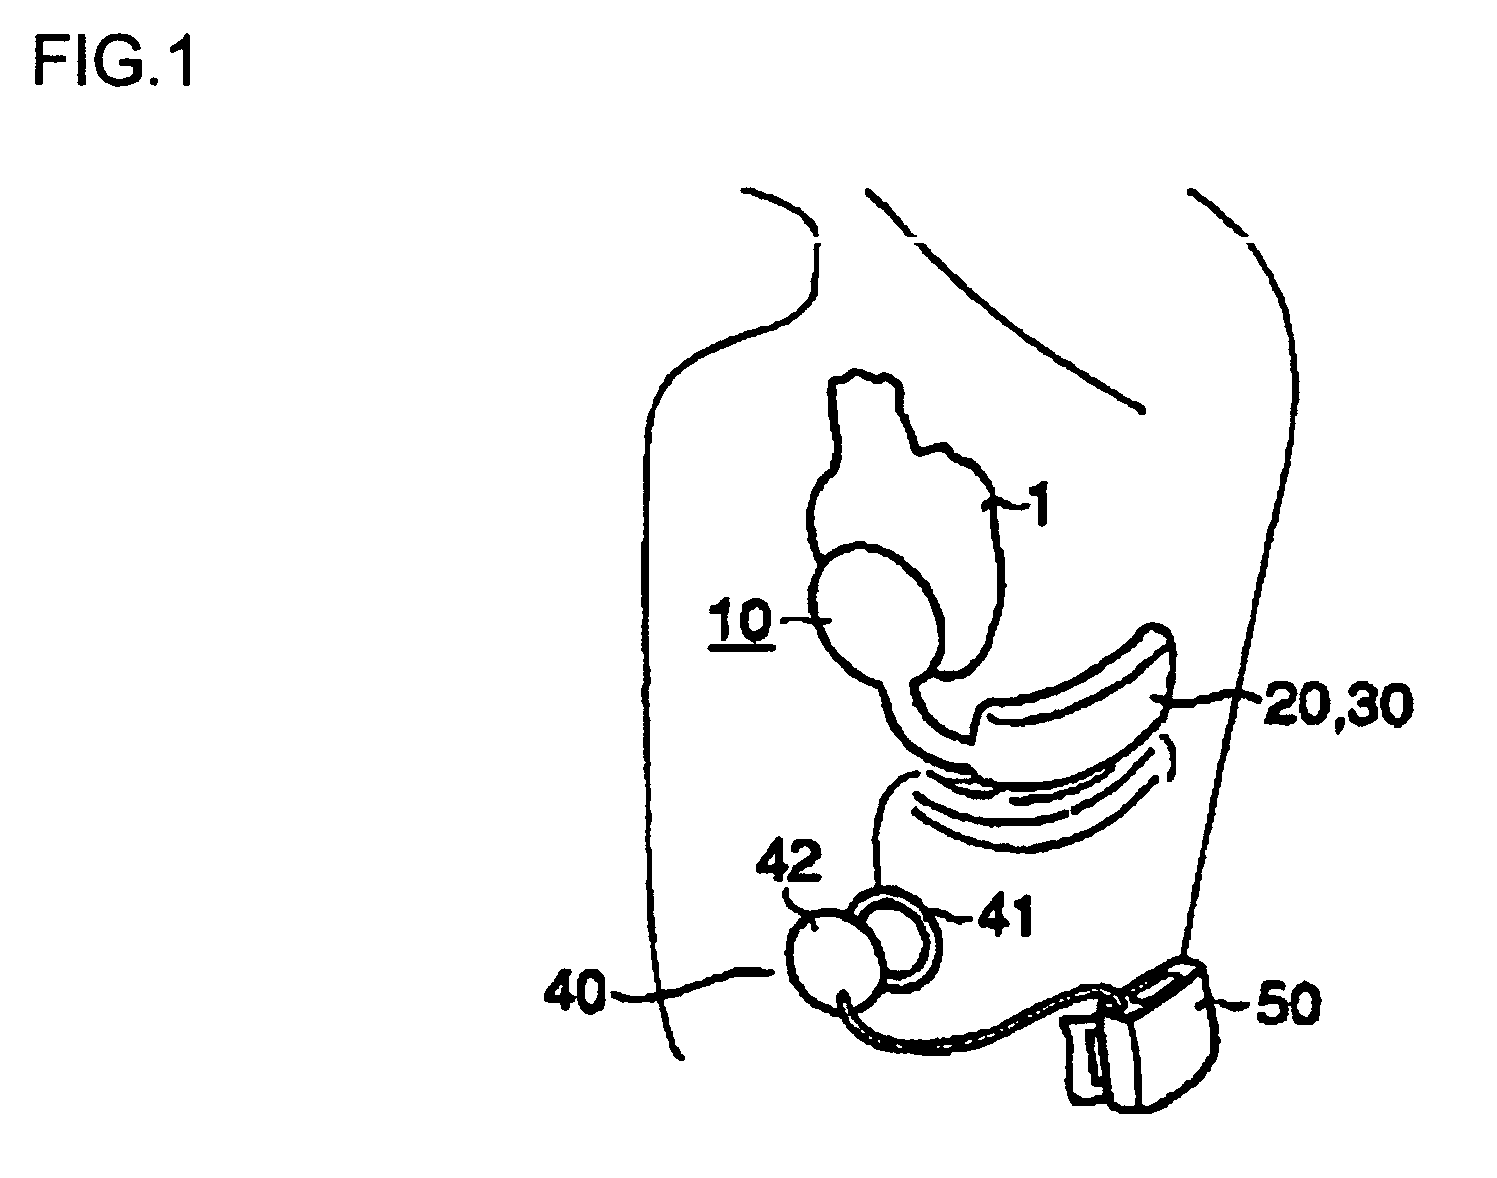 Artificial myocardial device assisting motion of heart